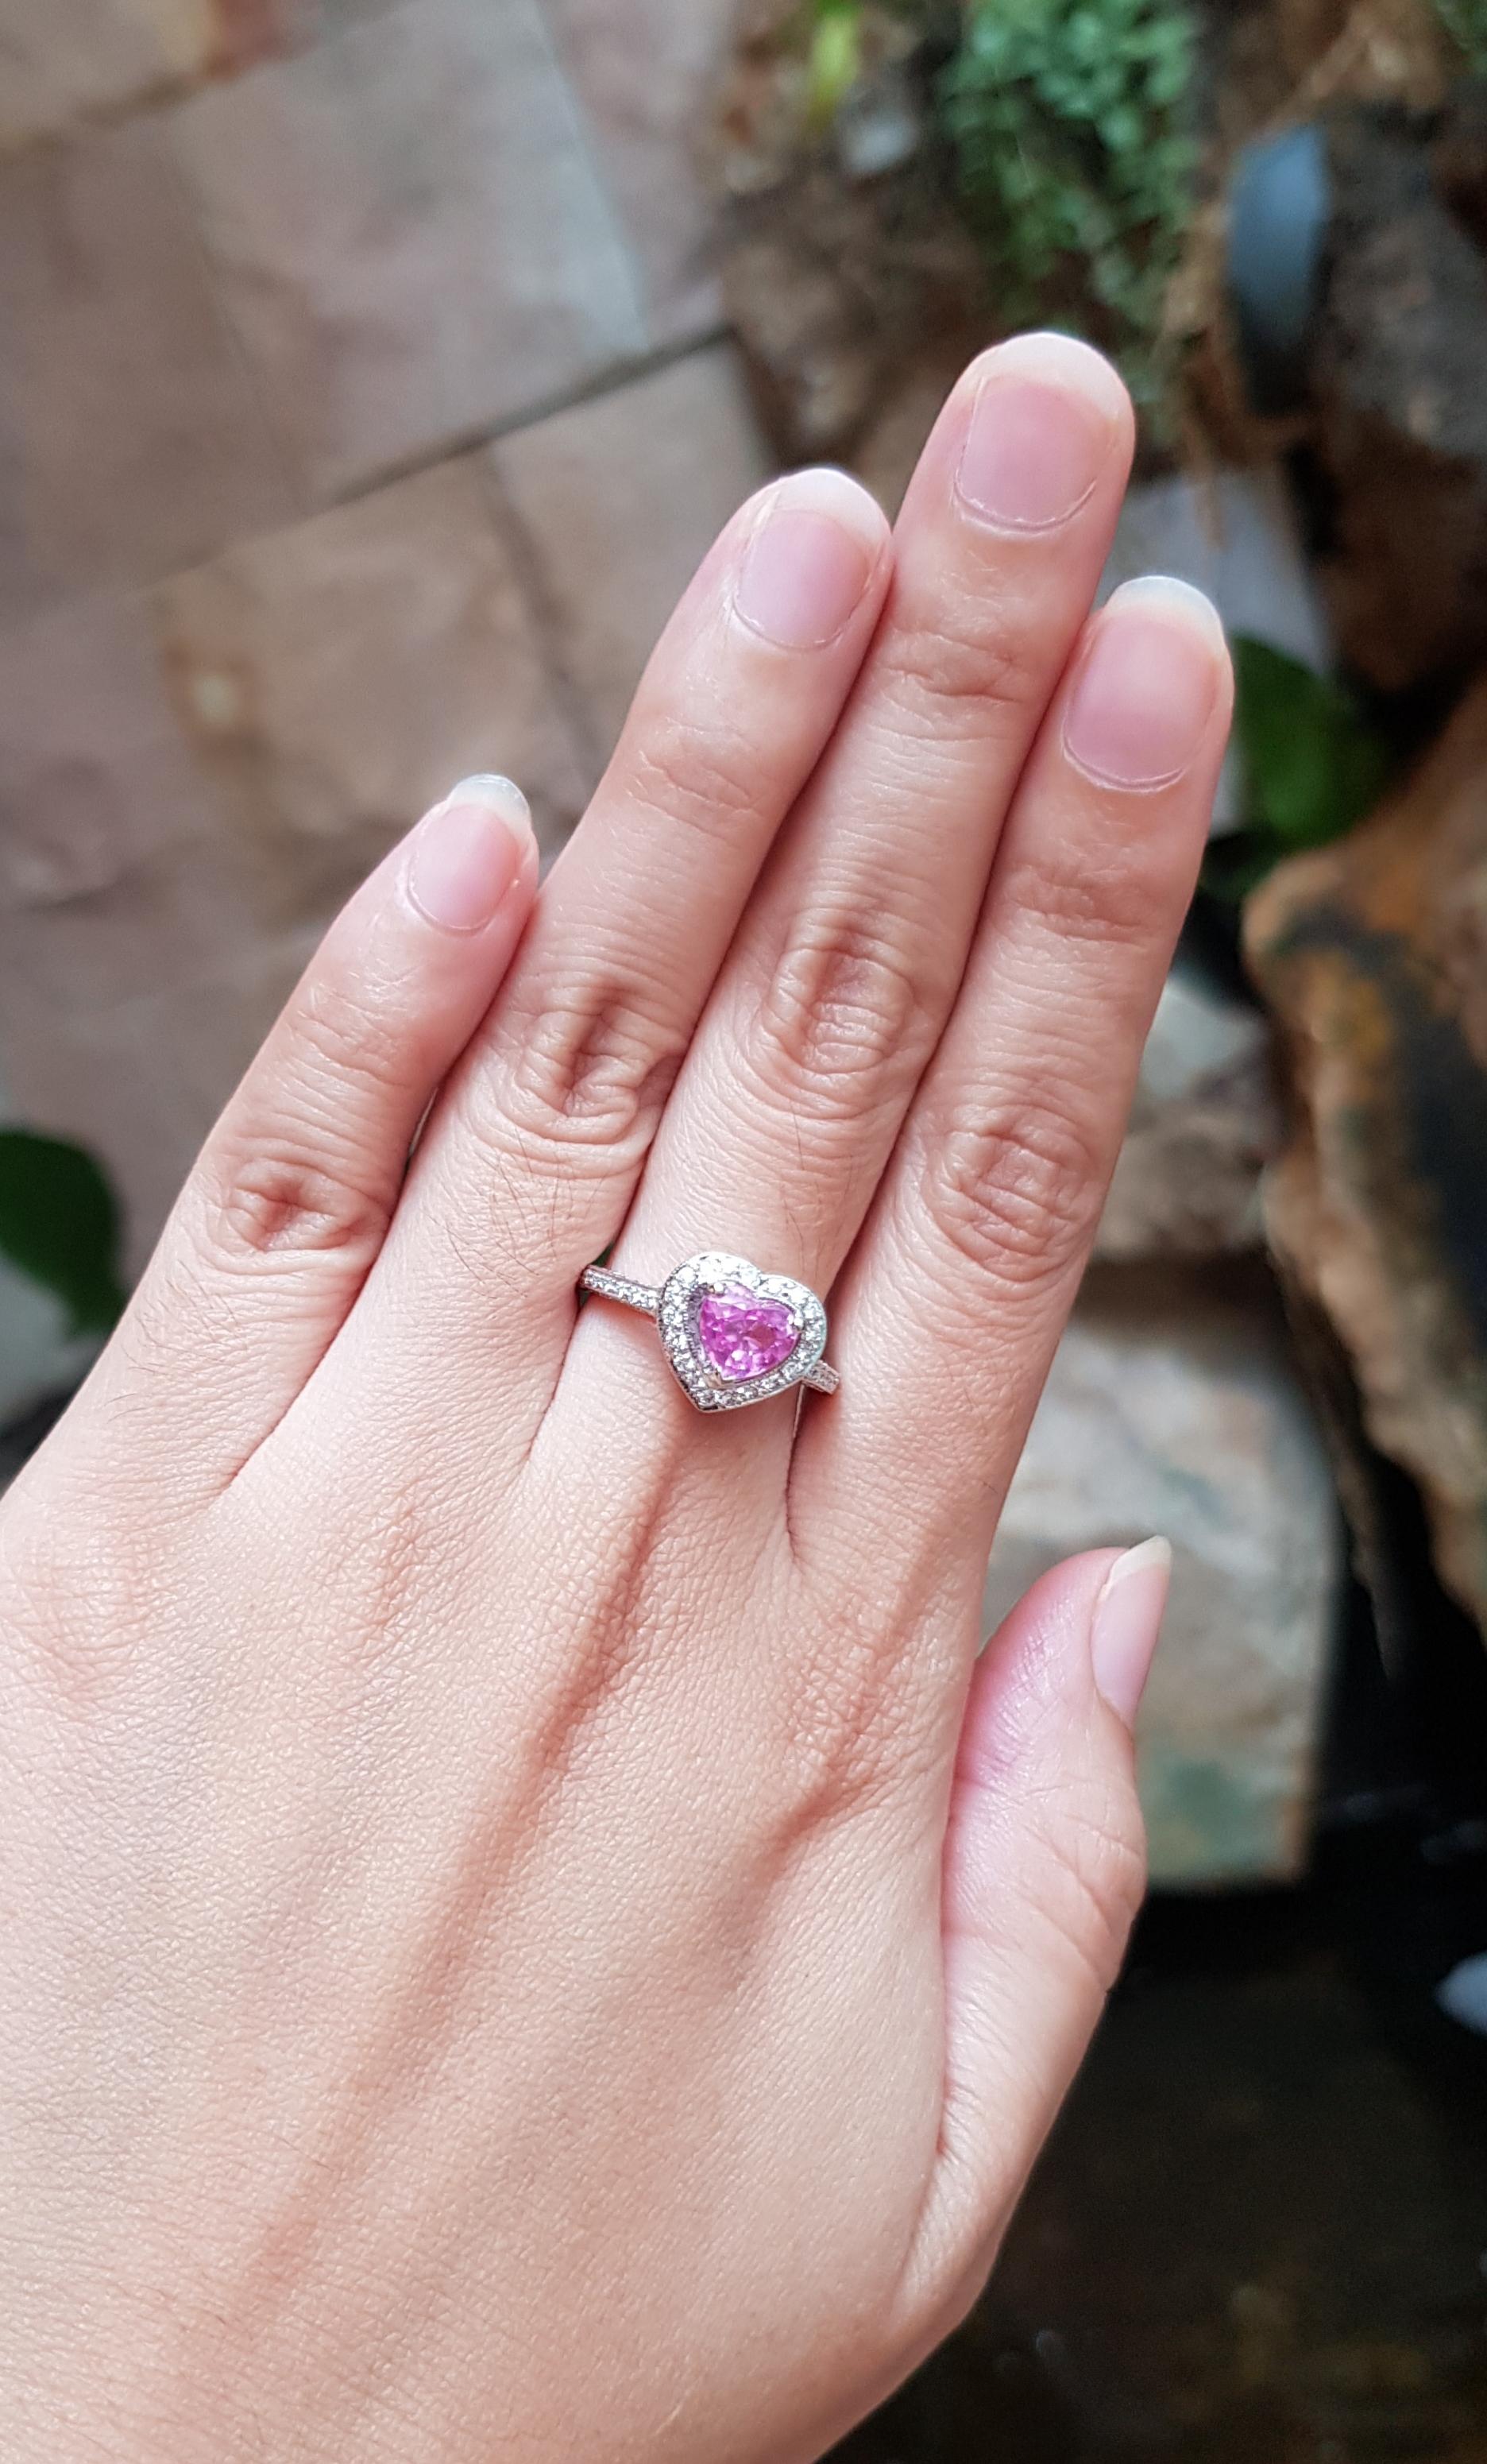 Pink Sapphire 1.15 carats with Diamond 0.54 carat Ring set in 18 Karat White Gold Settings

Width:  1.1 cm 
Length: 1.0 cm
Ring Size: 53
Total Weight: 4.66 grams

